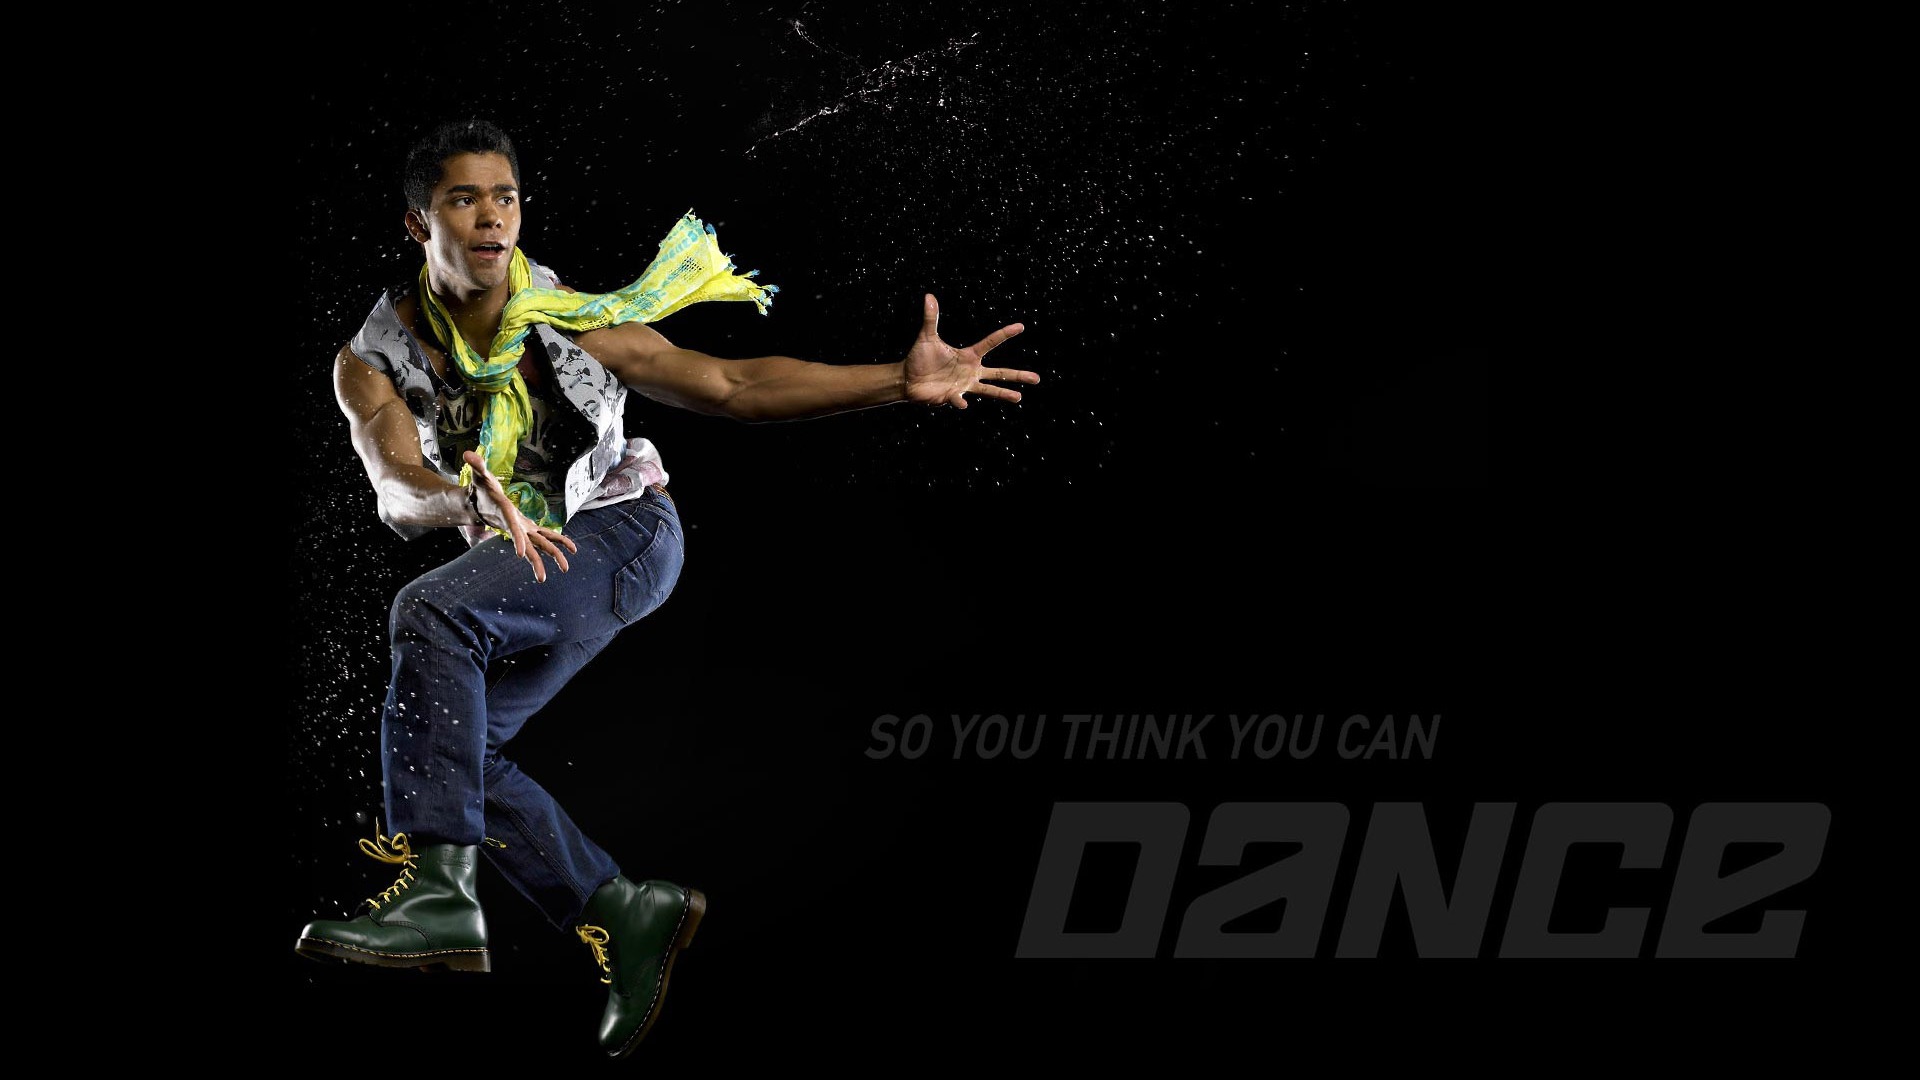 So You Think You Can Dance wallpaper (1) #2 - 1920x1080